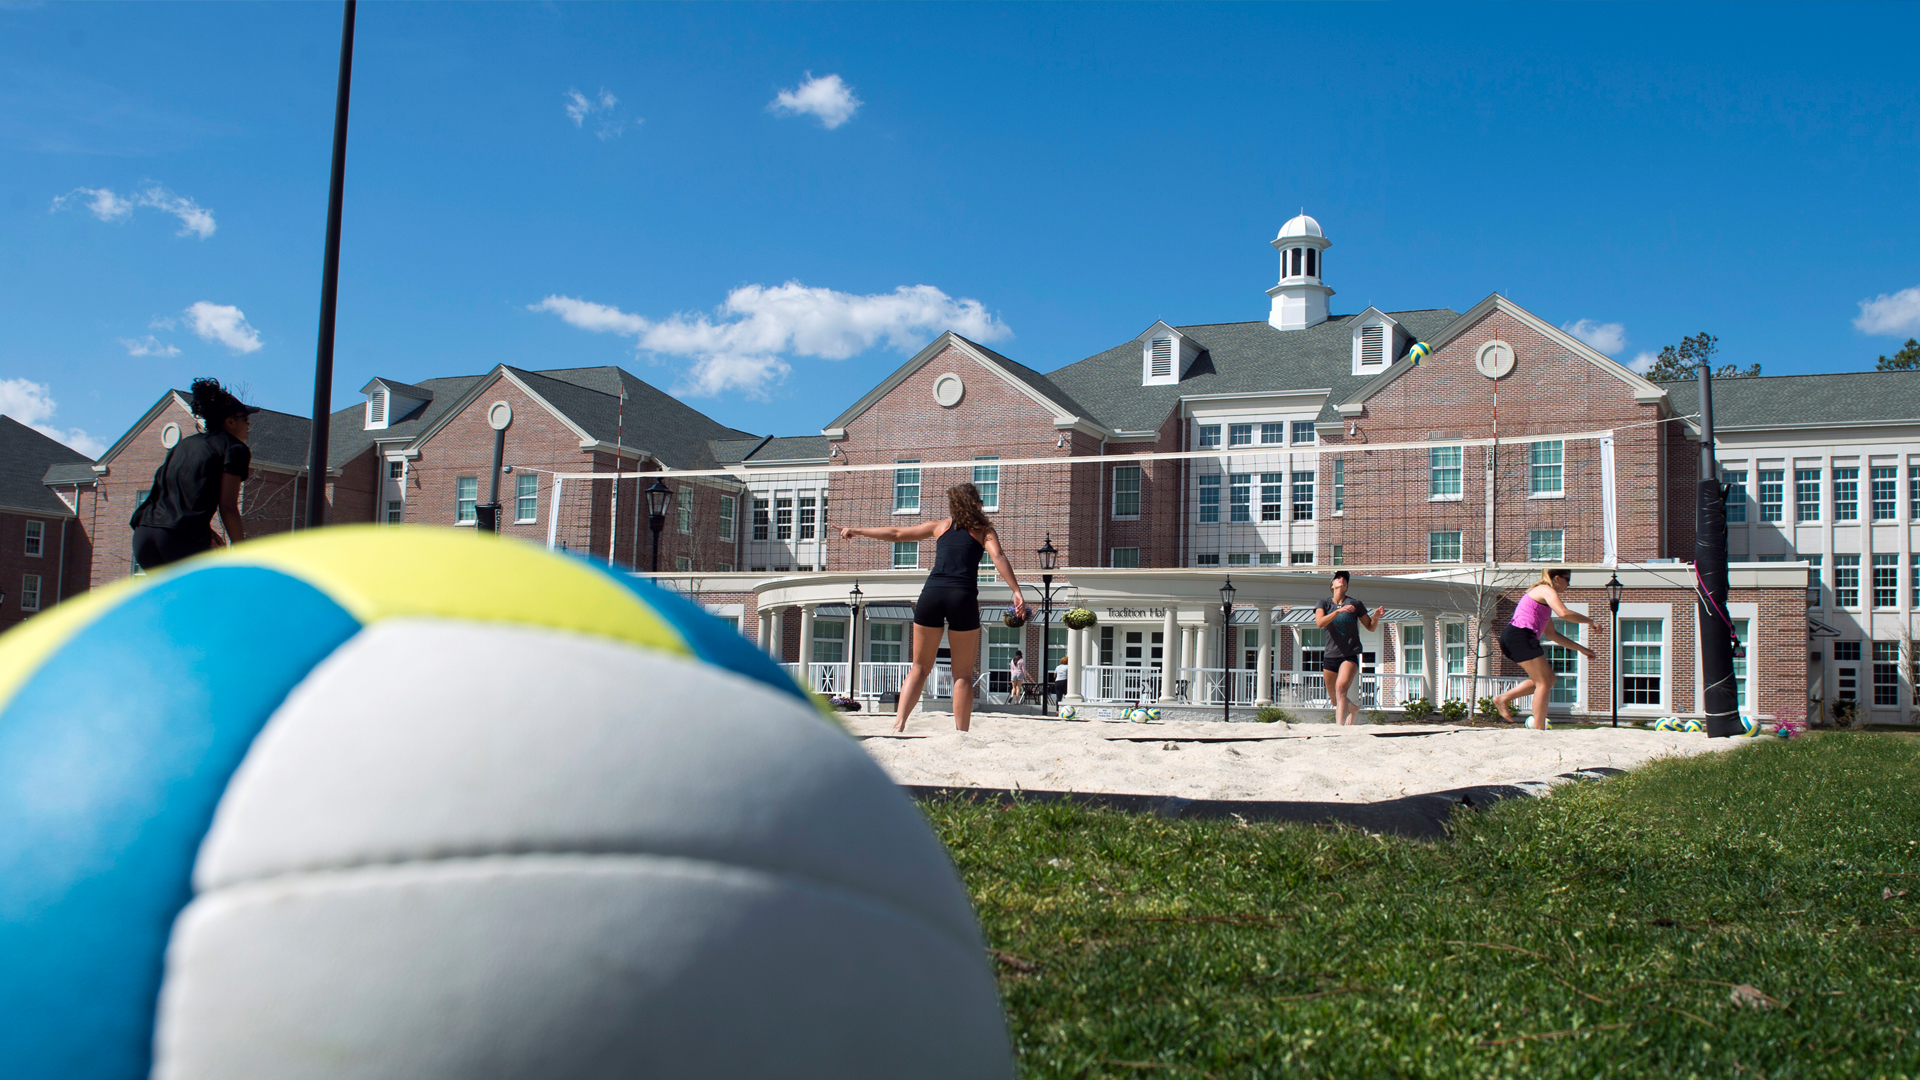 A volleyball match happening in front of the Coastal Carolina University Residence Halls